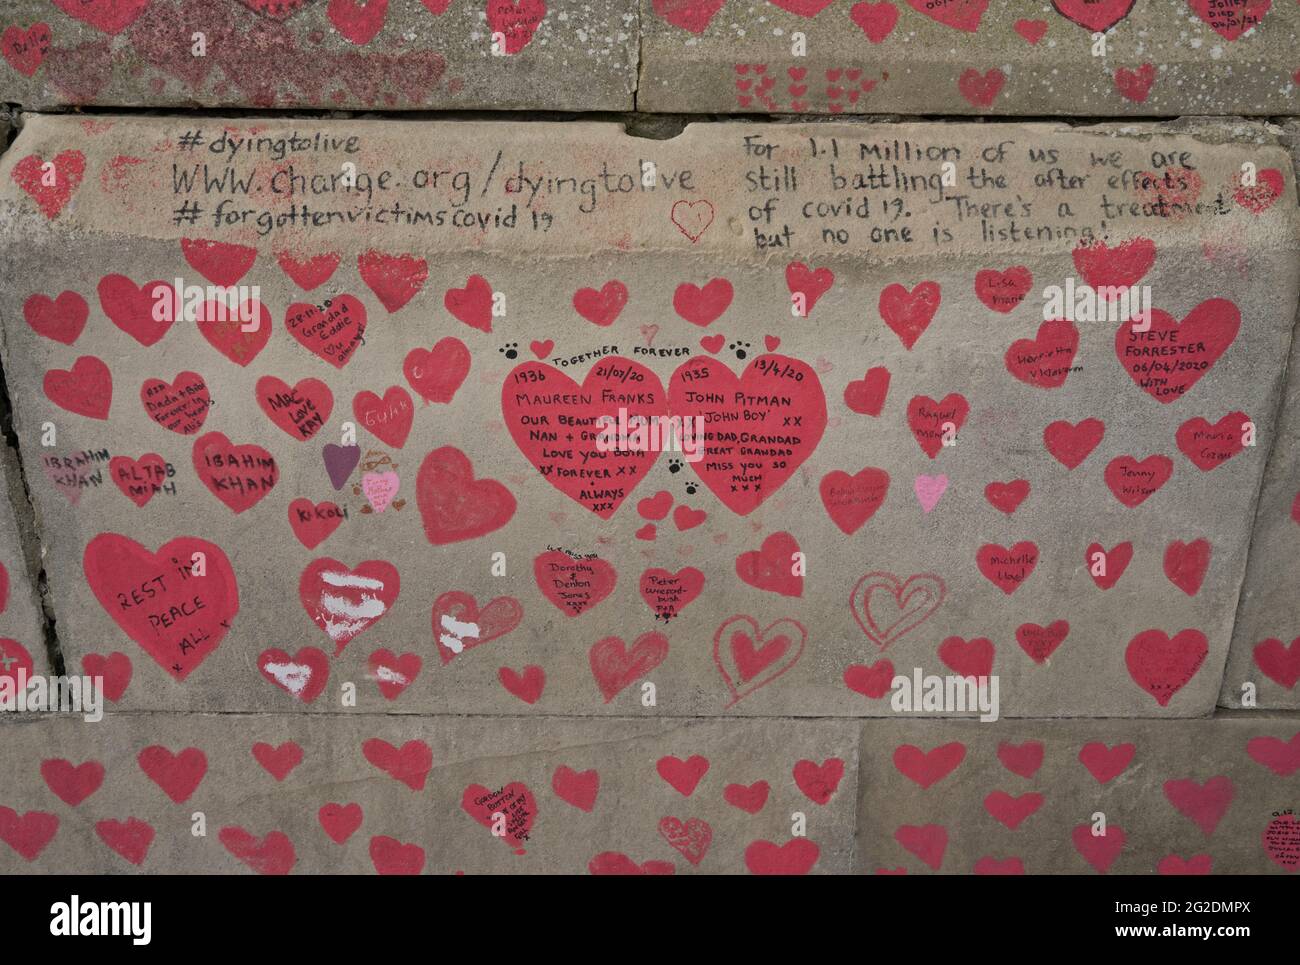 The National Covid Memorial Wall, a public mural painted by volunteers to commemorate victims of the COVID-19 pandemic in the United Kingdom. It is on the South Bank of the River Thames in London, opposite the Palace of Westminster, London, England, UK. Stock Photo